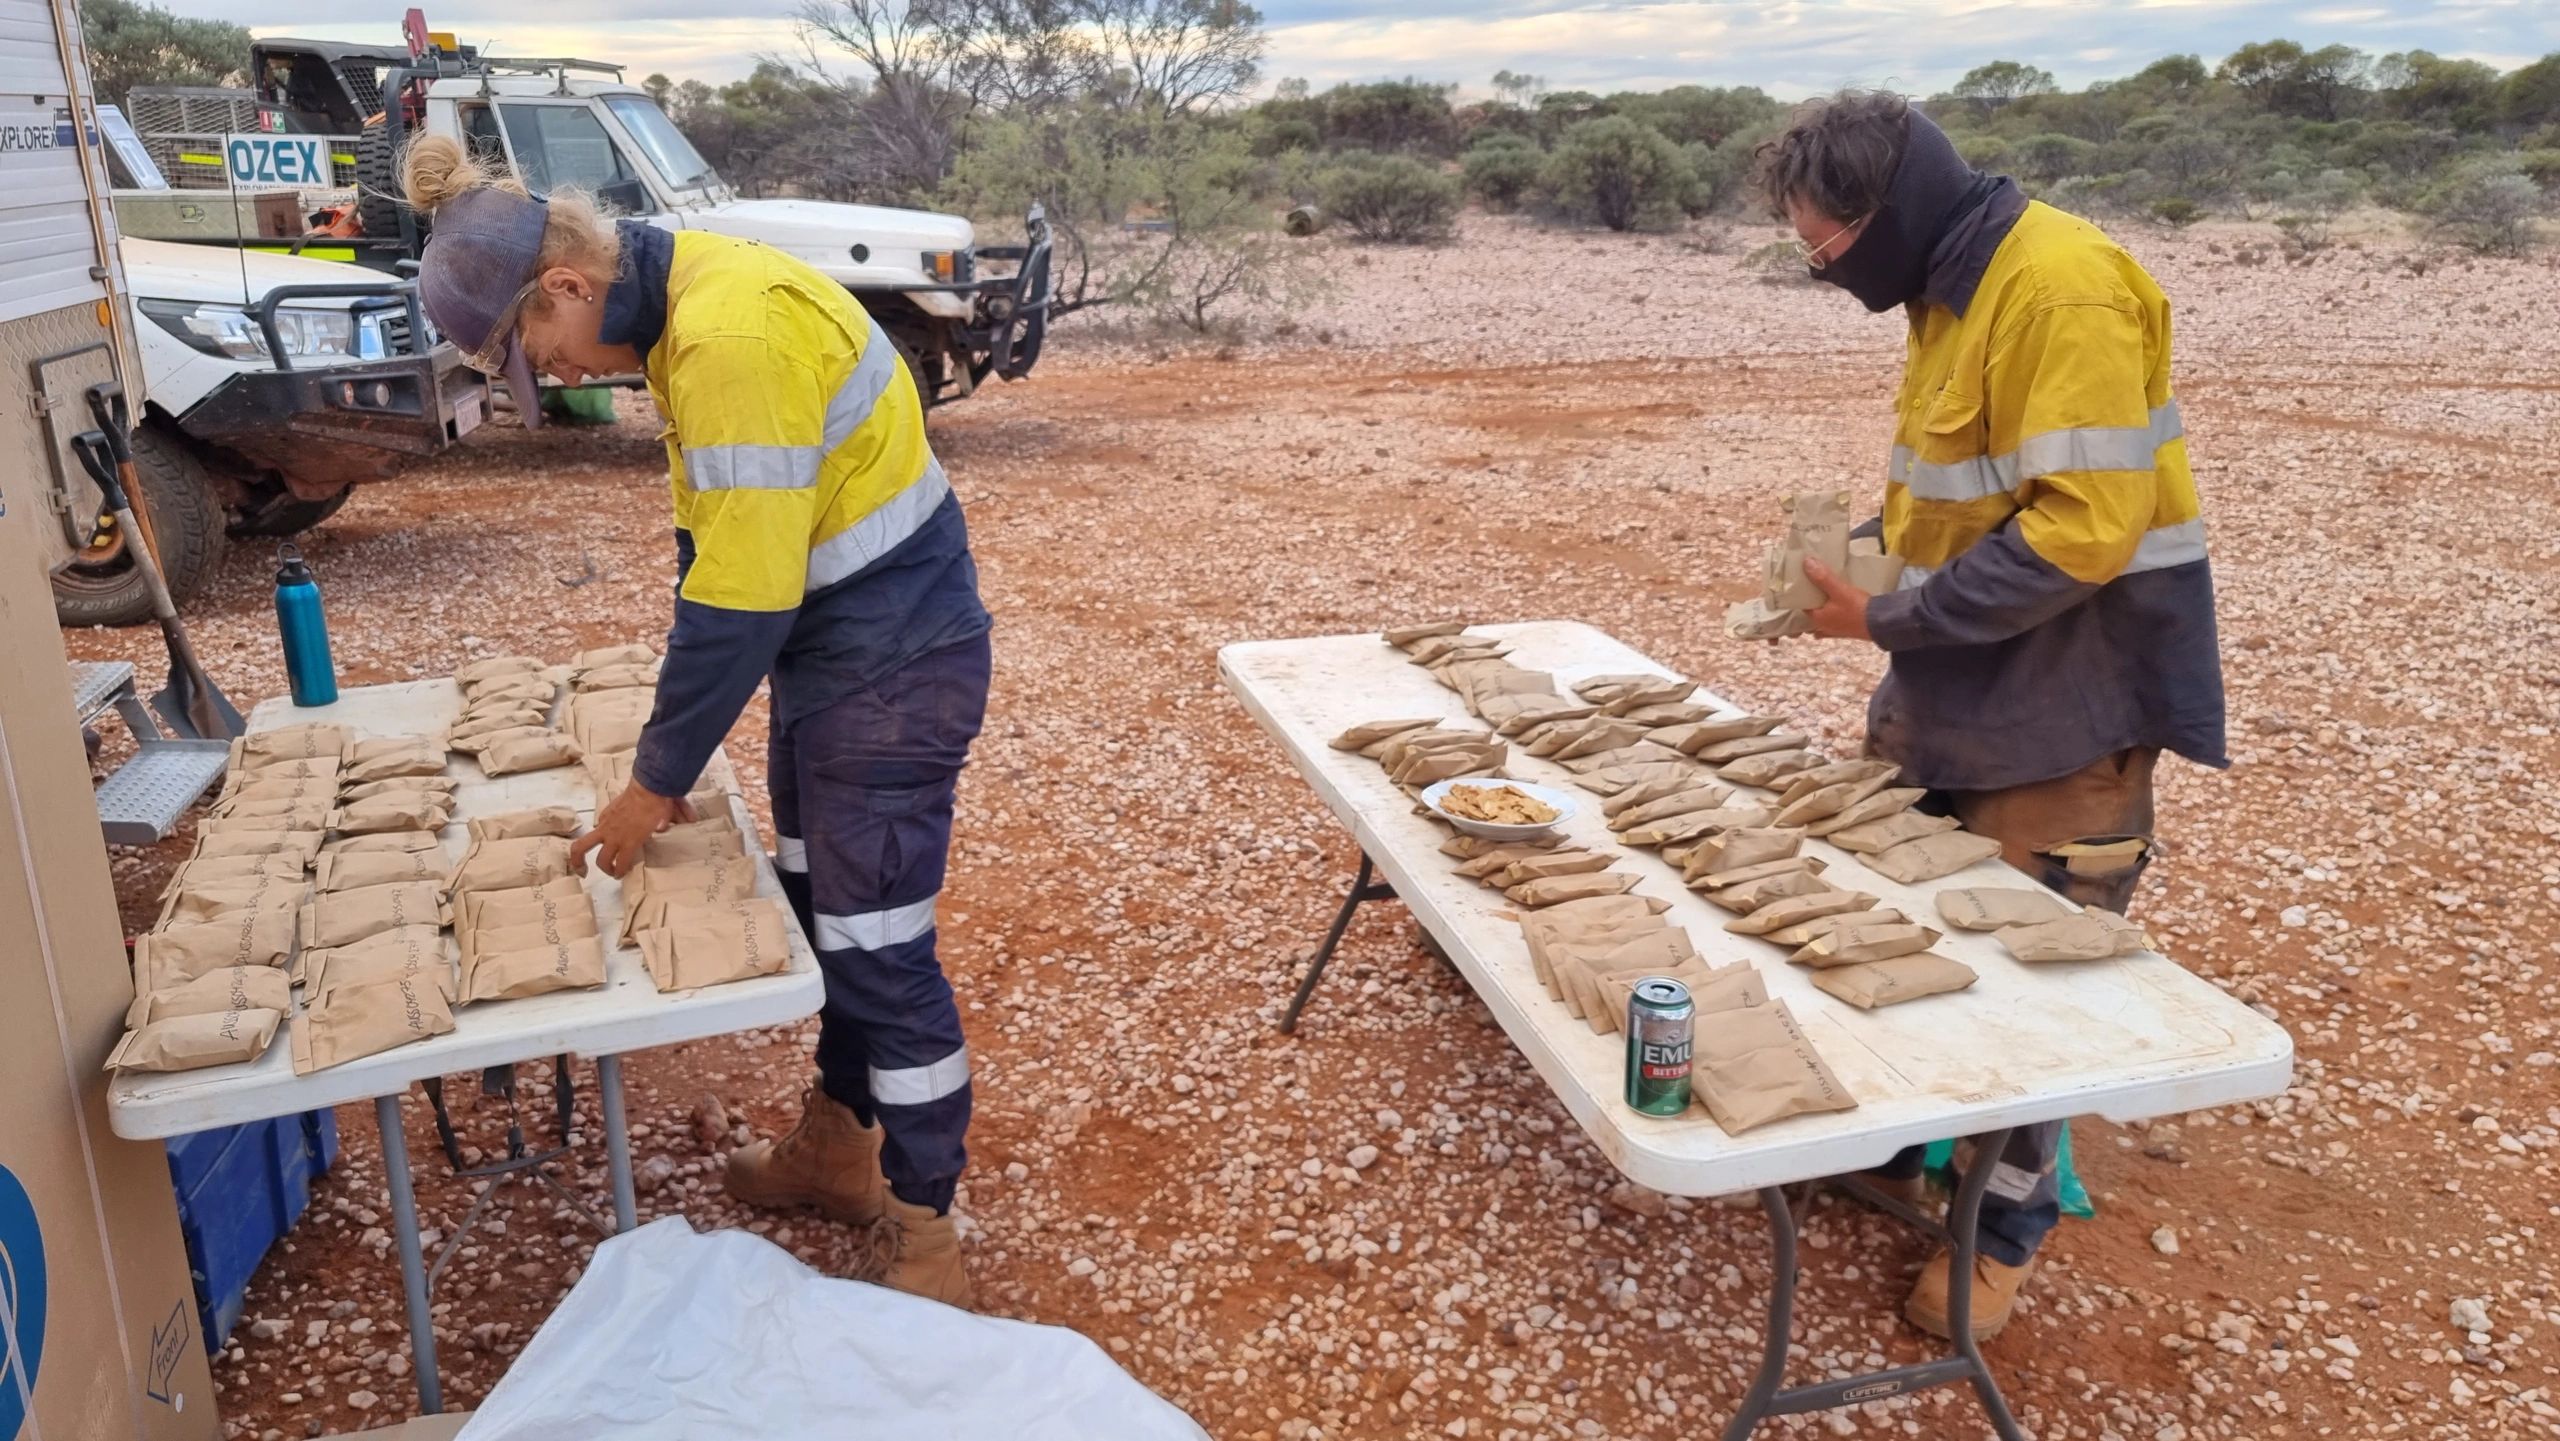 contract soil sampling in the gascoyne region.  The field assistants count soil samples.